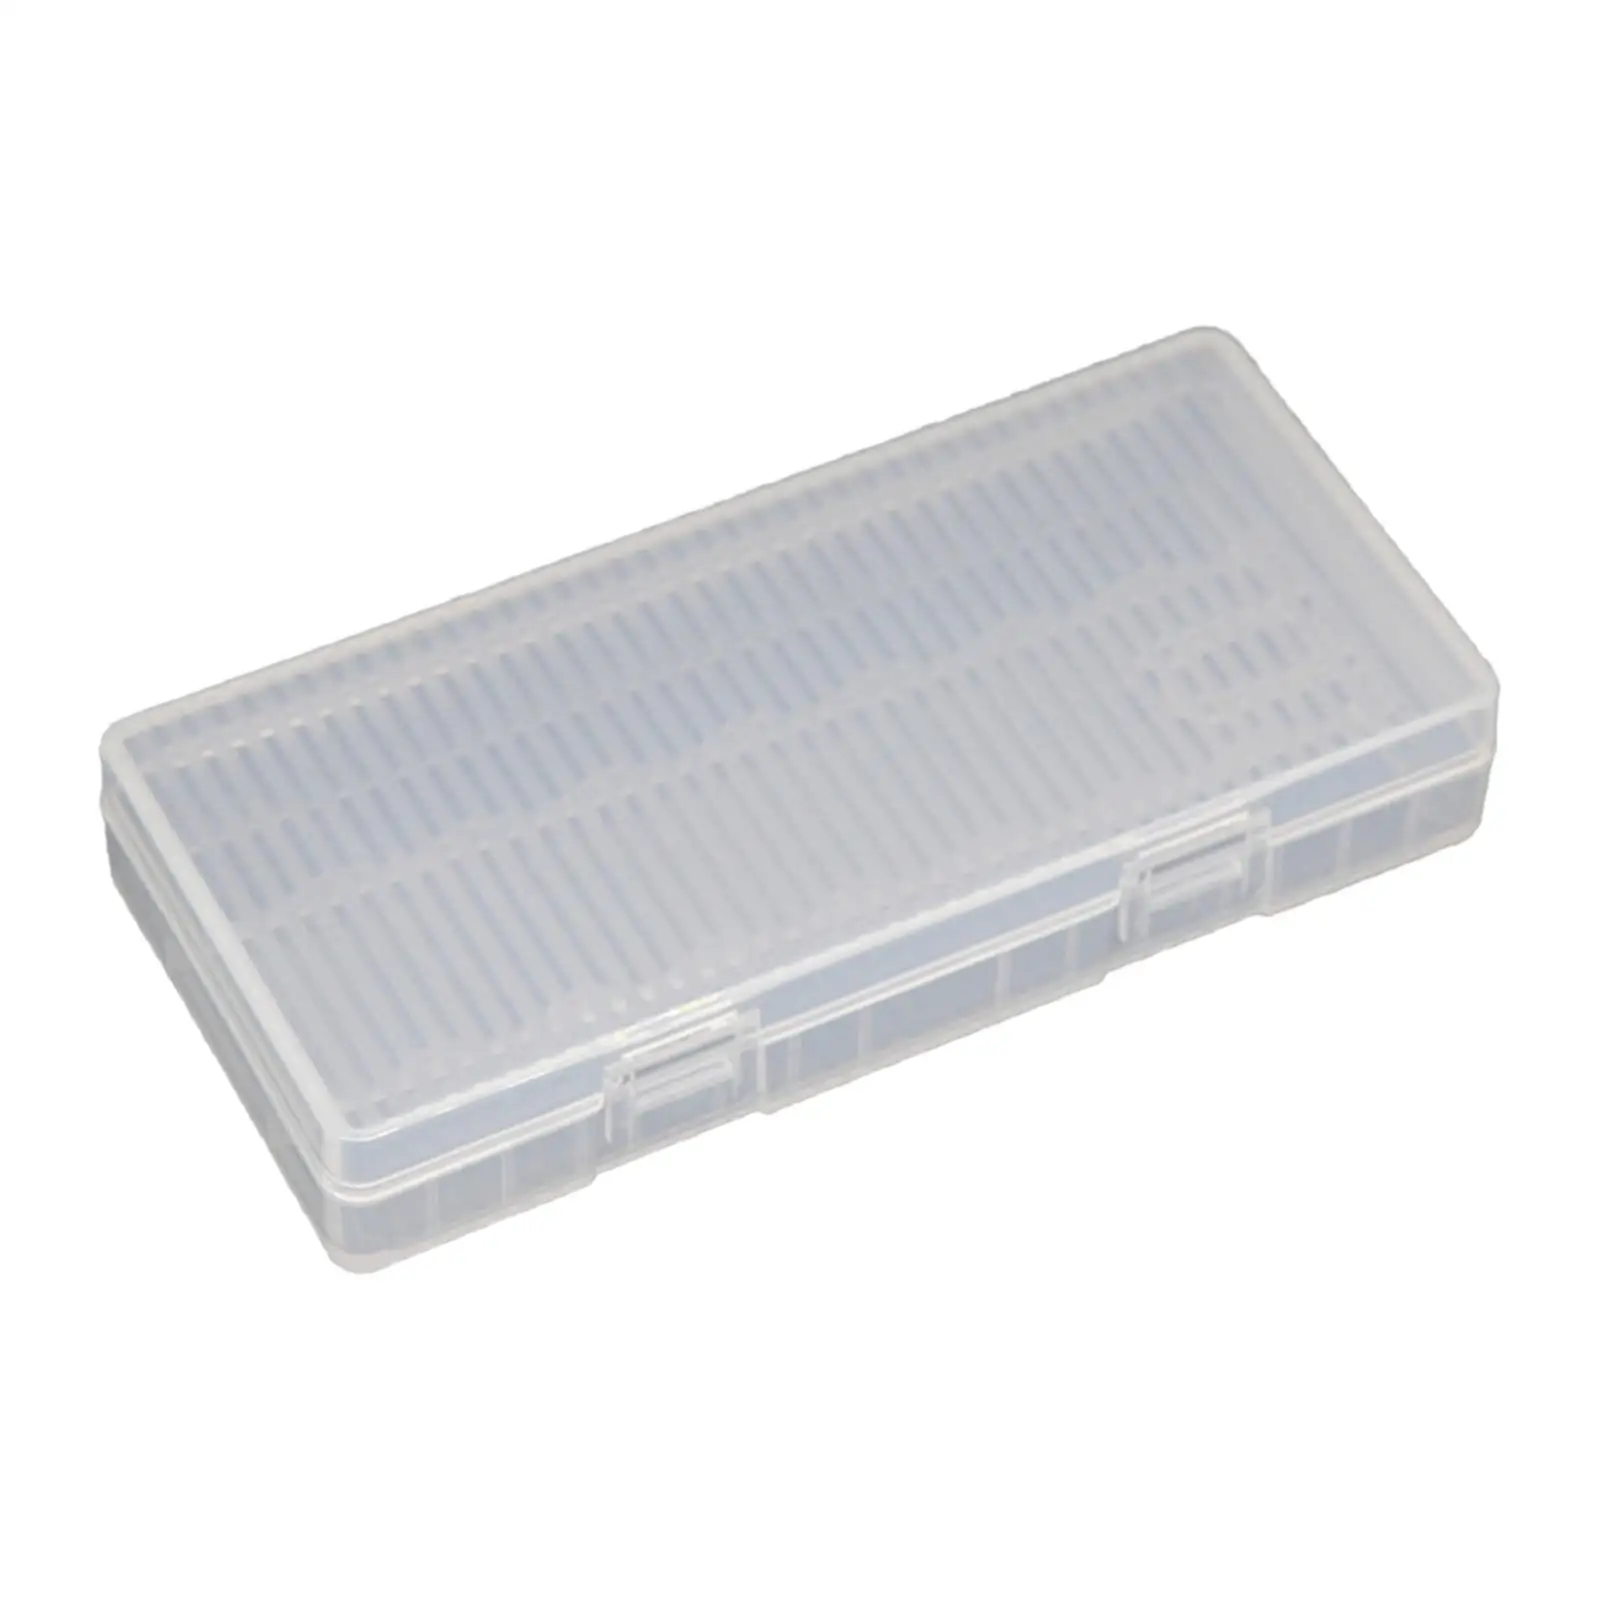 Battery Storage Case Holds 8 AA Batteries Anti Collision Clear Color Protective Container